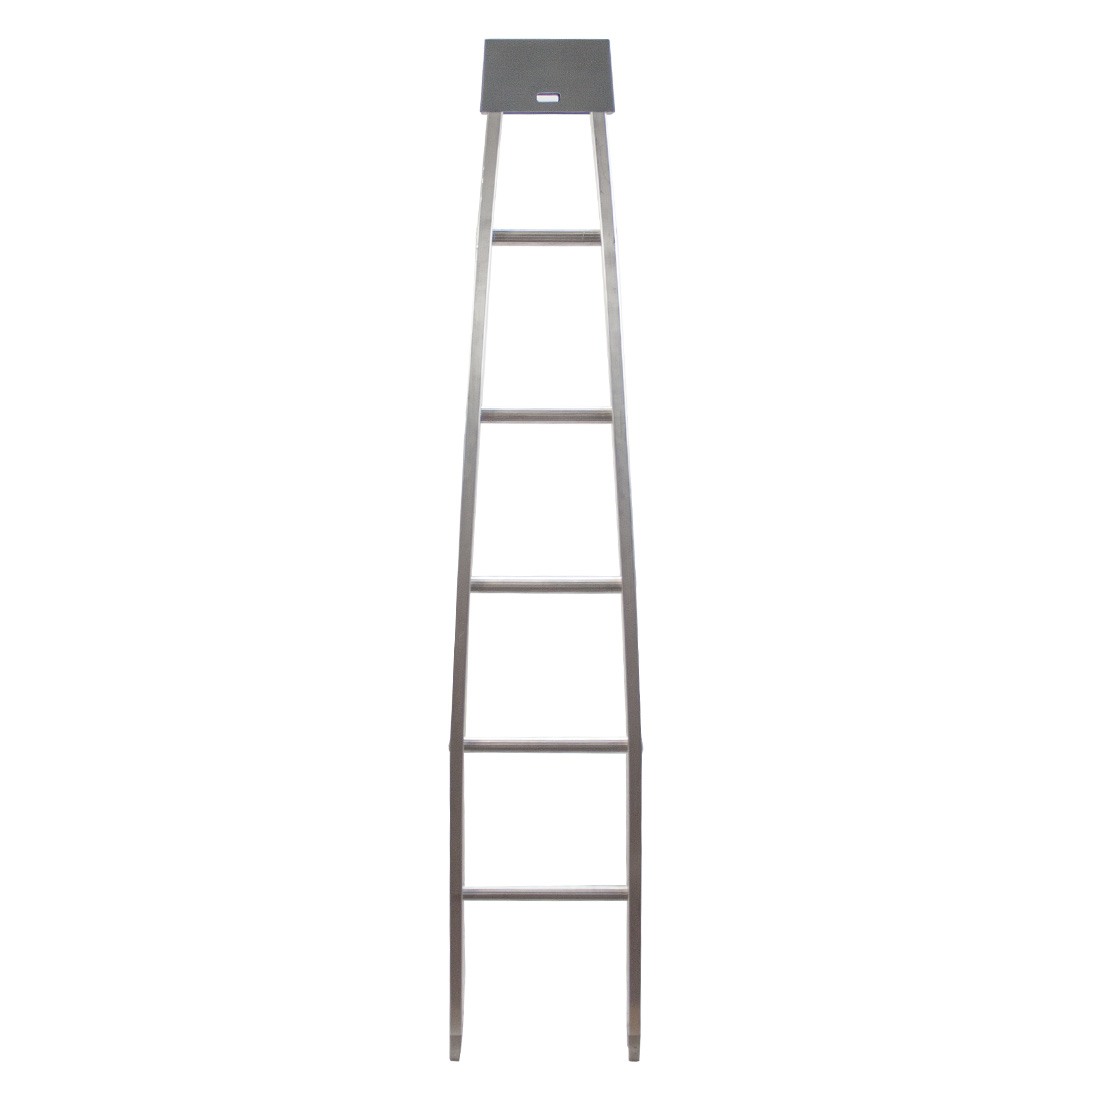 Metallic Ladder Aluminum Open Top Section - 6 Foot - Full Product View